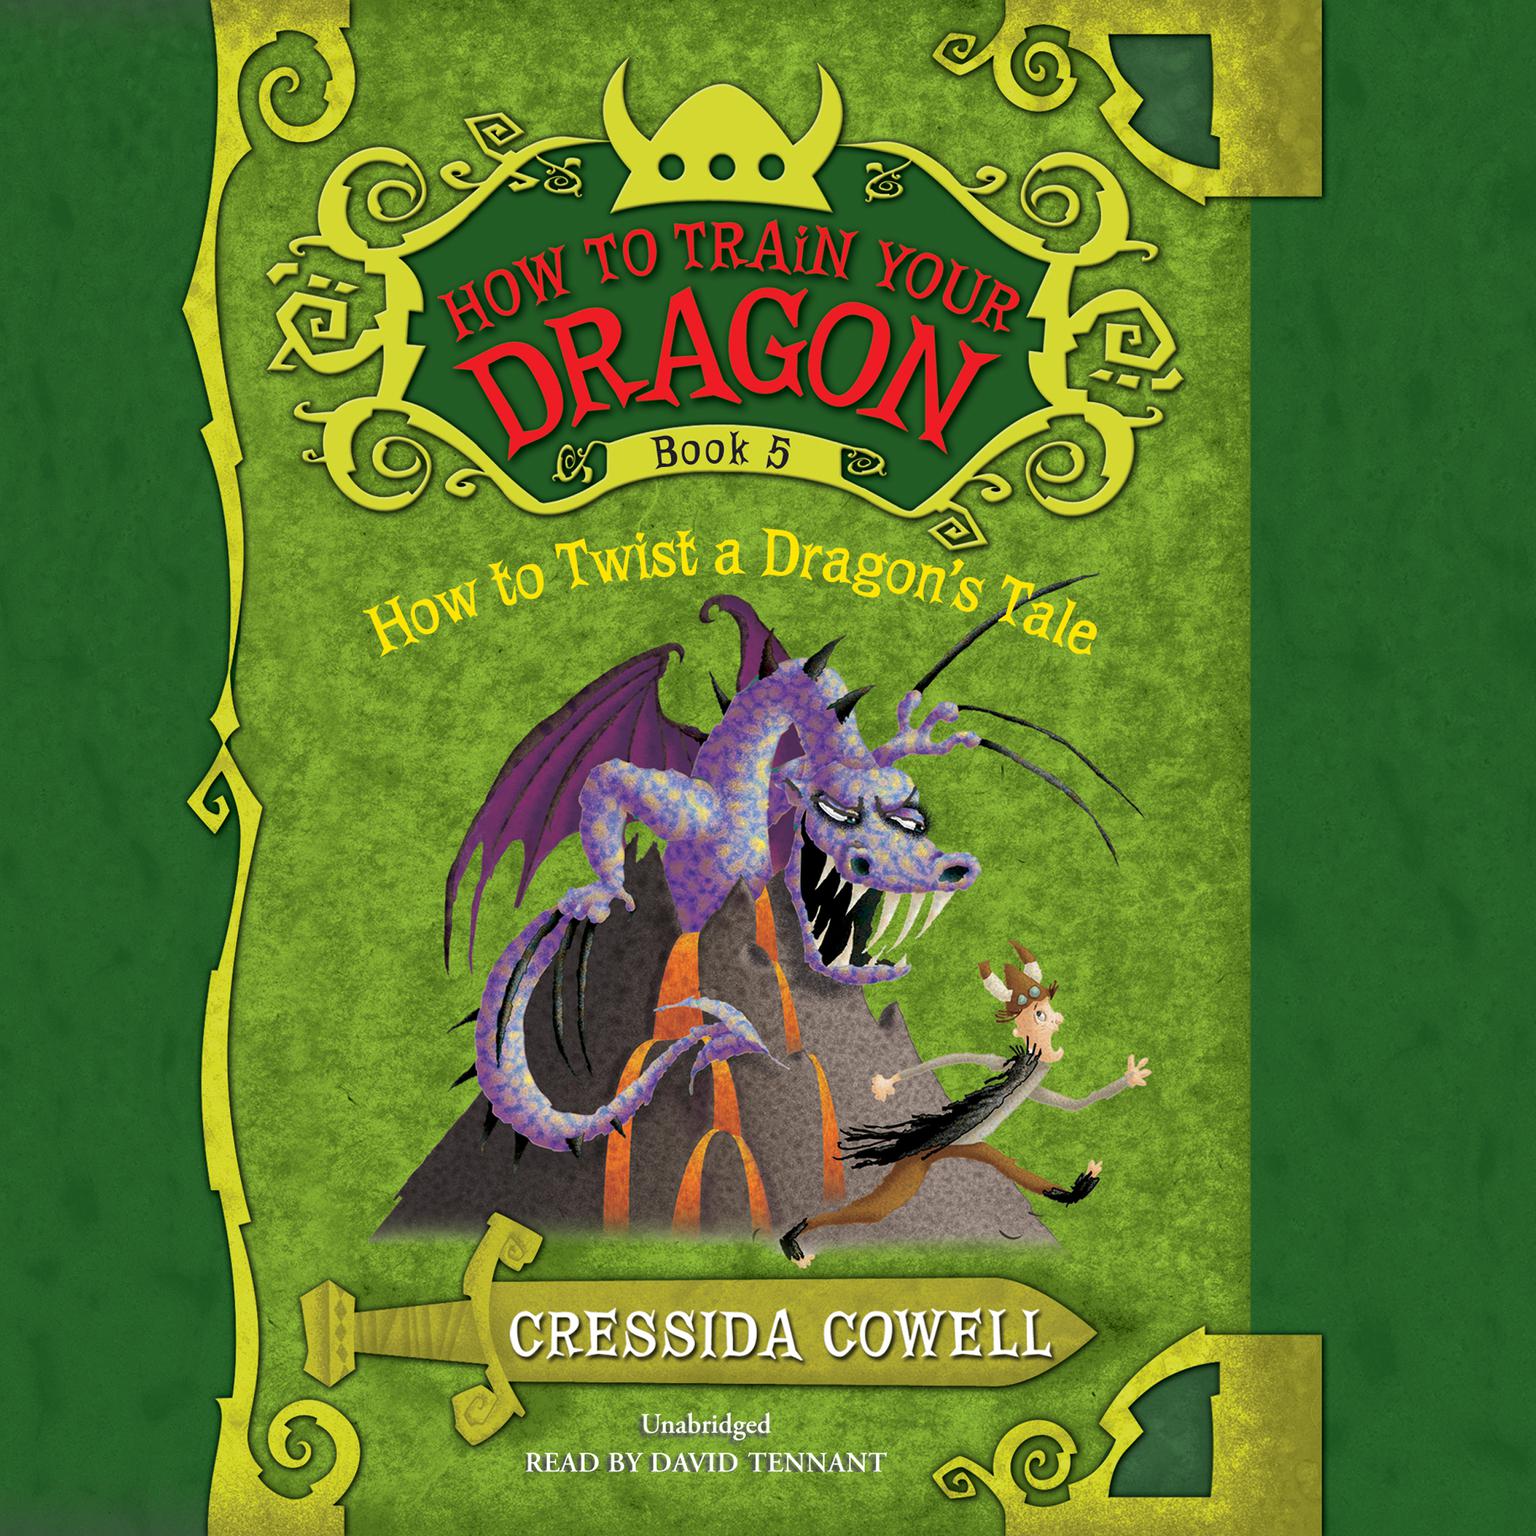 HOW TO TWIST A DRAGONS TALE Audiobook, by Cressida Cowell